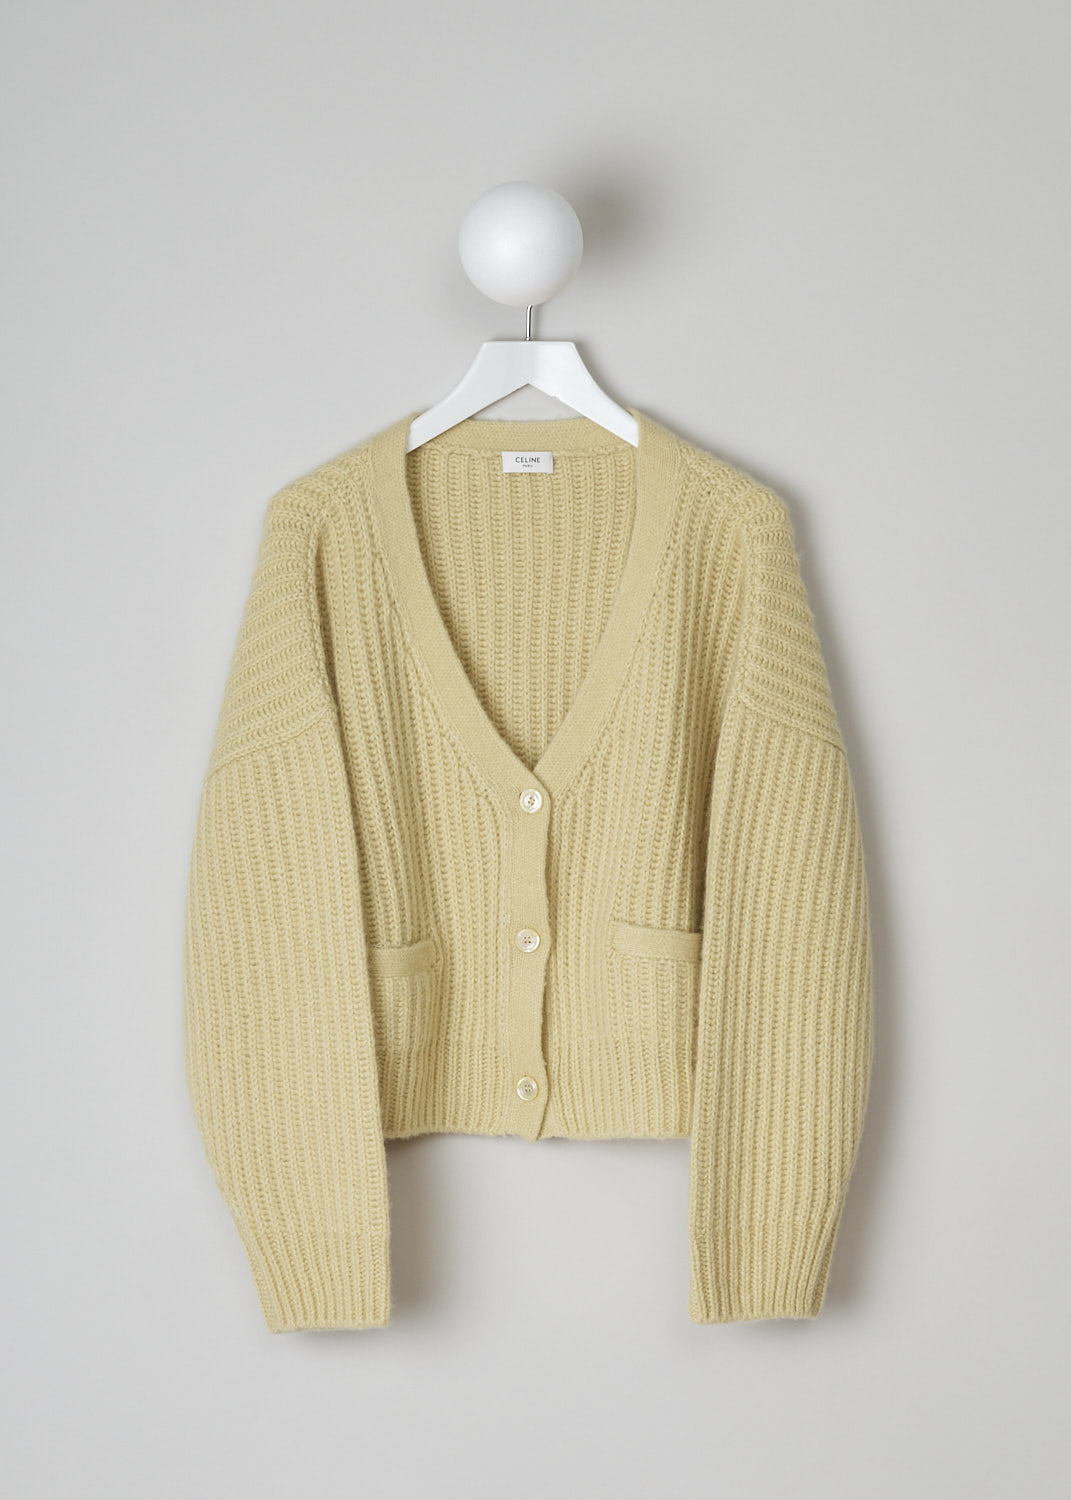 CELINE, PALE YELLOW CASHMERE CARDIGAN, 266R_2A49X_11PY,  Yellow, Front, This pale yellow cashmere cardigan has a V-neck with a front button closure. The cardigan has dropped shoulders. In the front, the cardigan has two patch pockets. 
